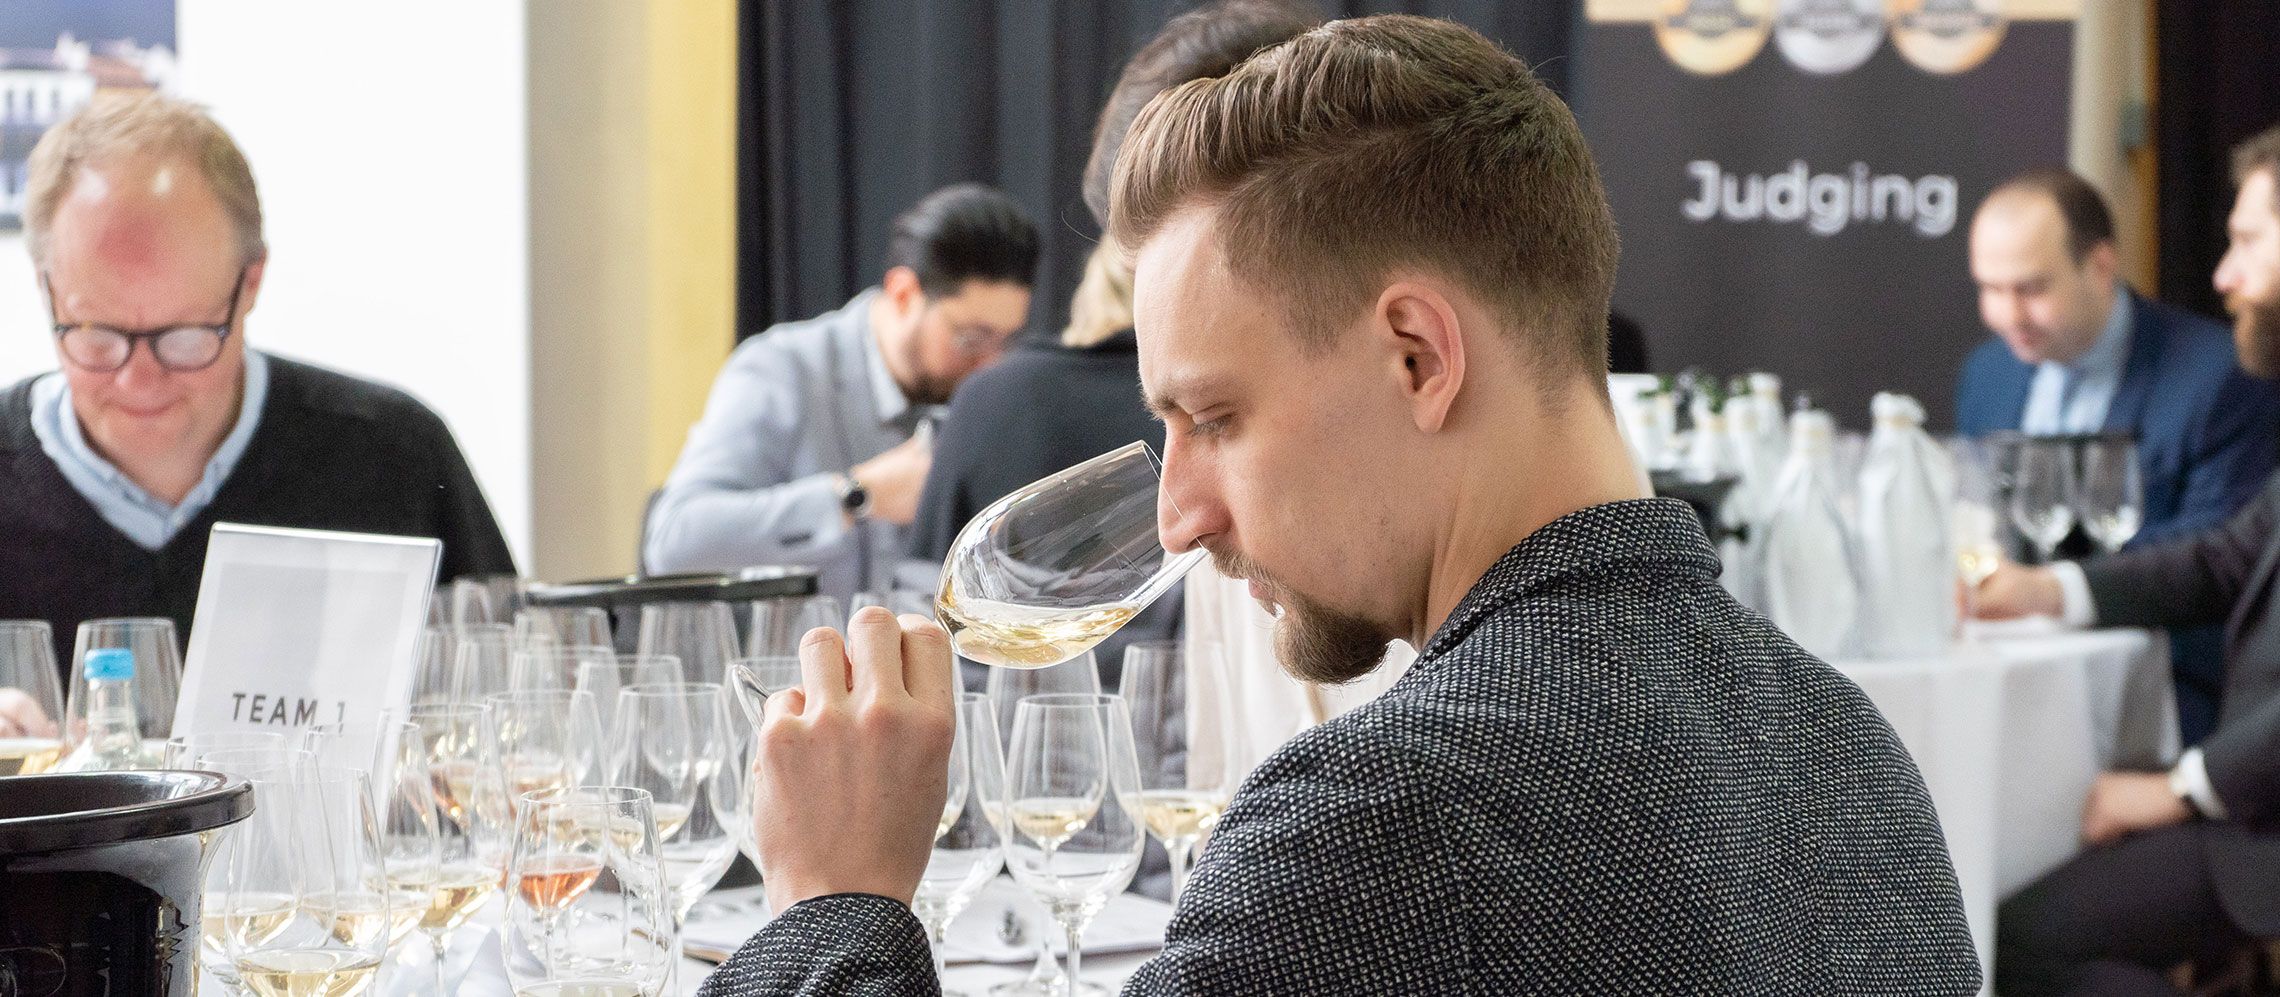 Photo for: London Wine Competition: Final Call For ‘Drinkable Wines’